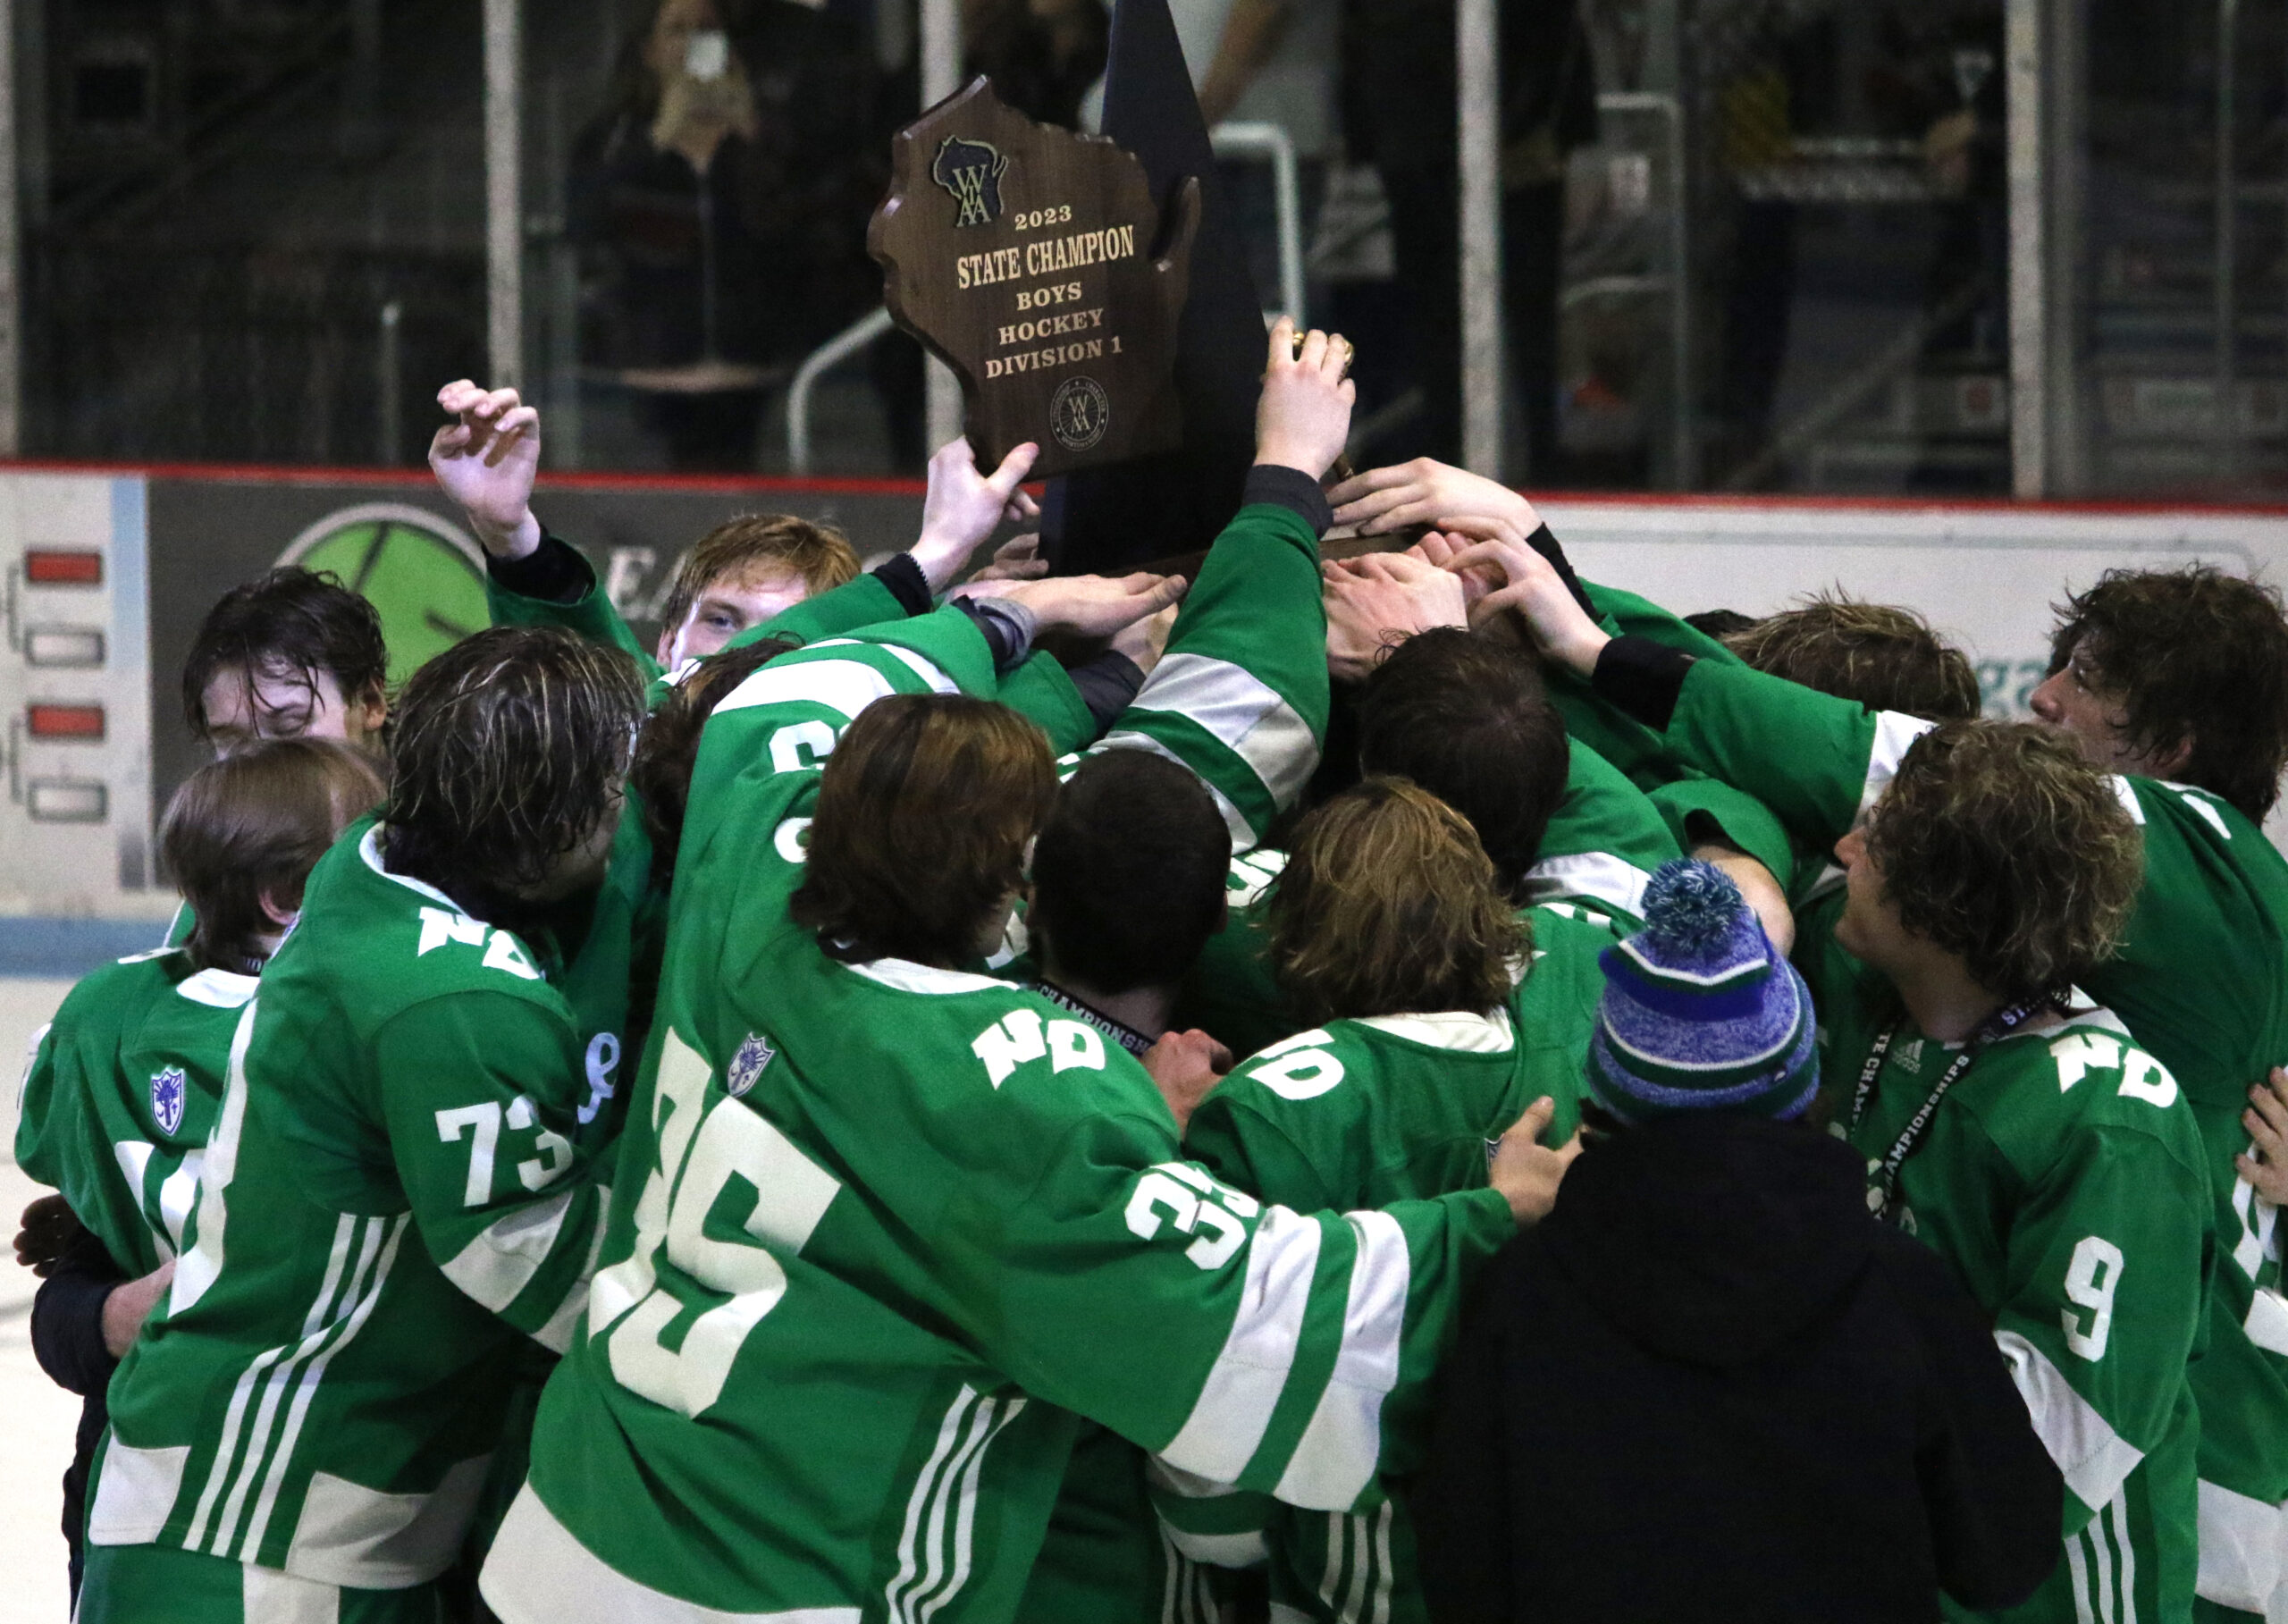 Notre Dame captures first state title since 2012